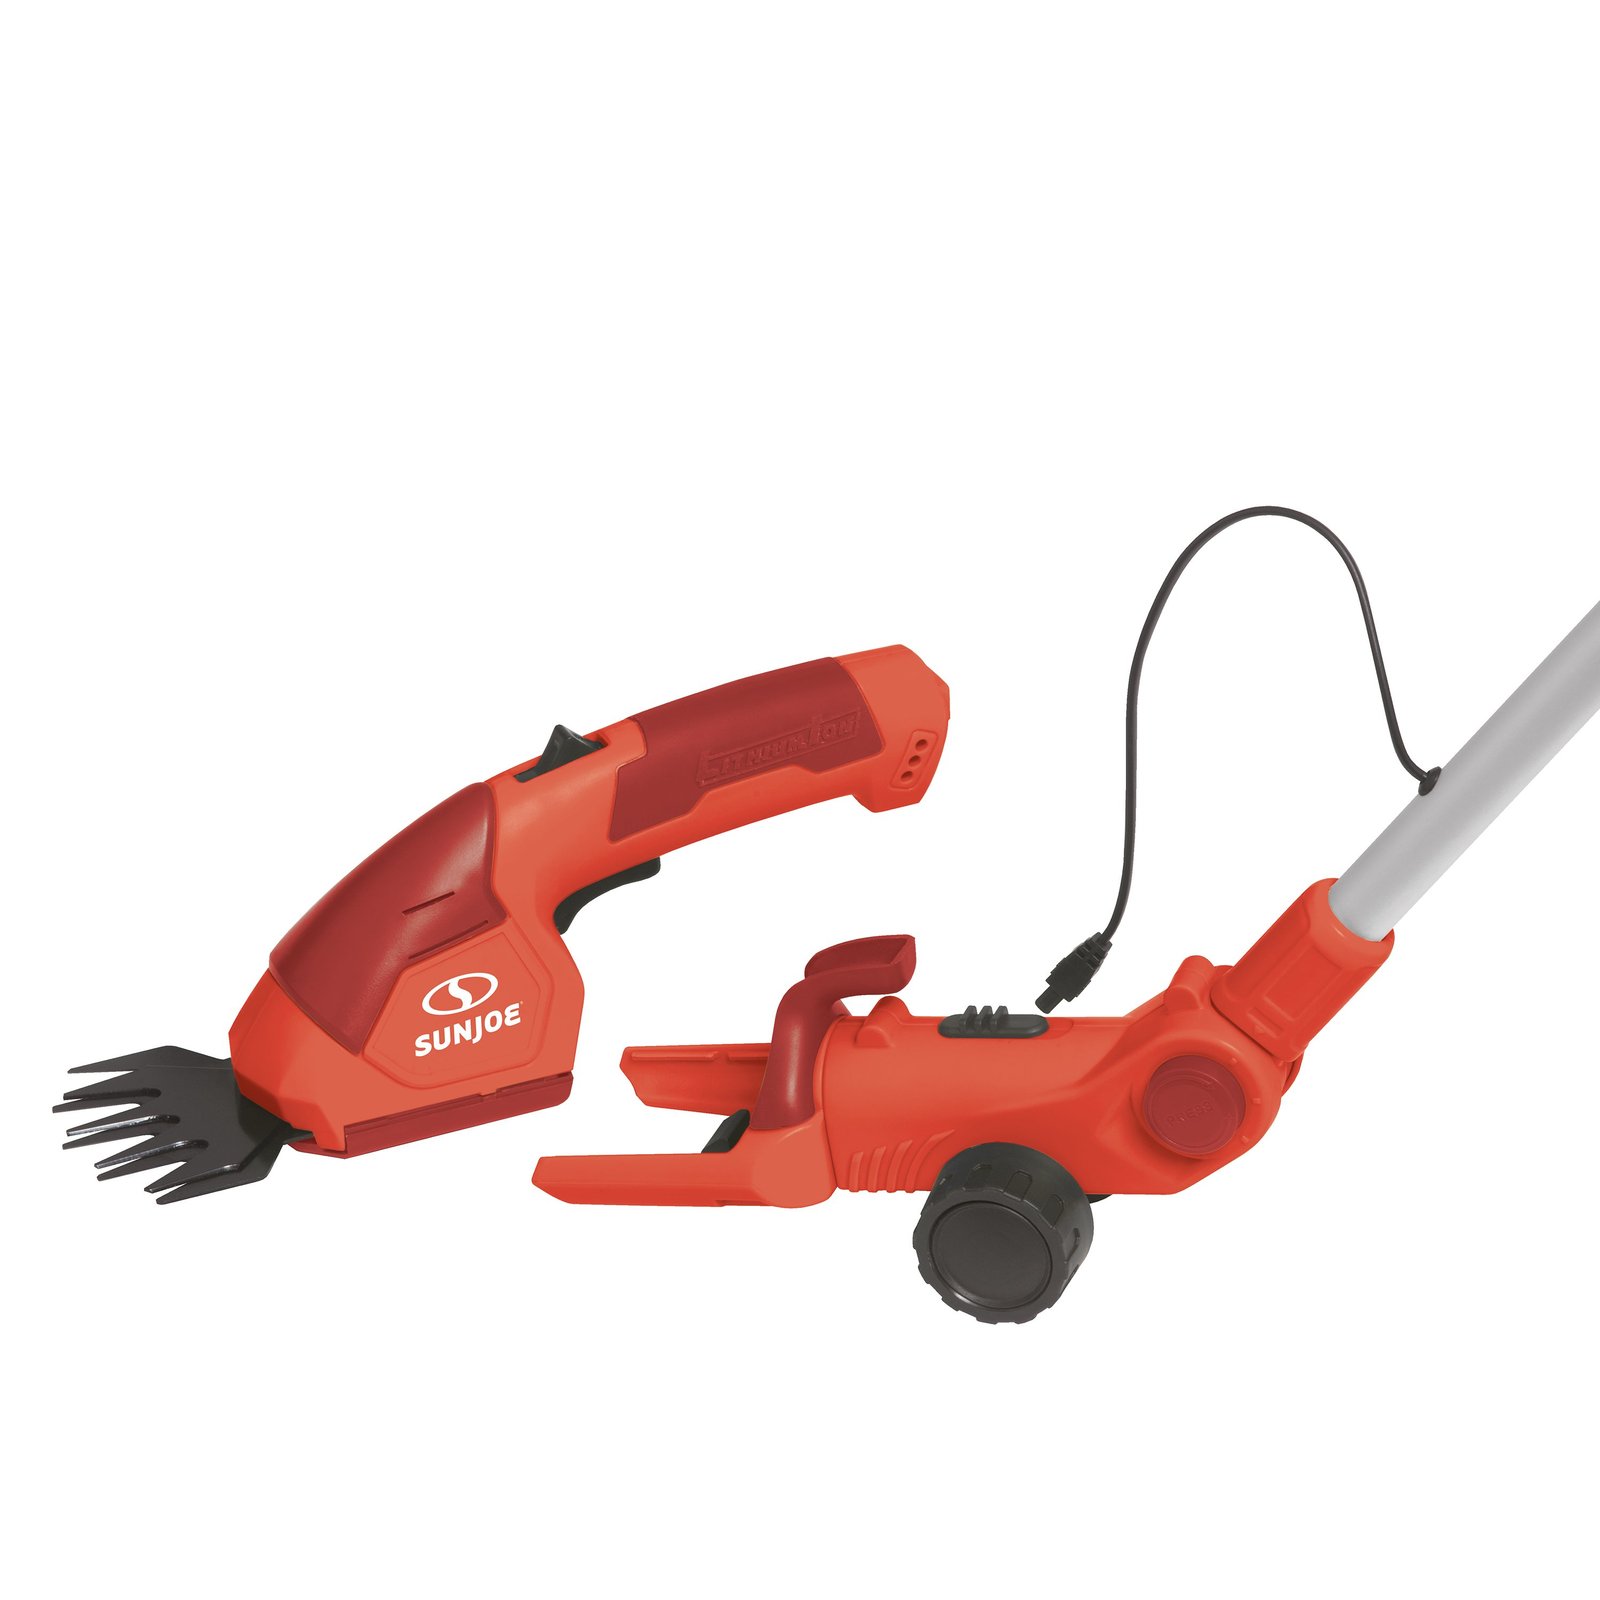 Sun Joe 2-in-1 Cordless Telescoping Grass Trimmer, 7.2 Volt (Red) - image 2 of 5